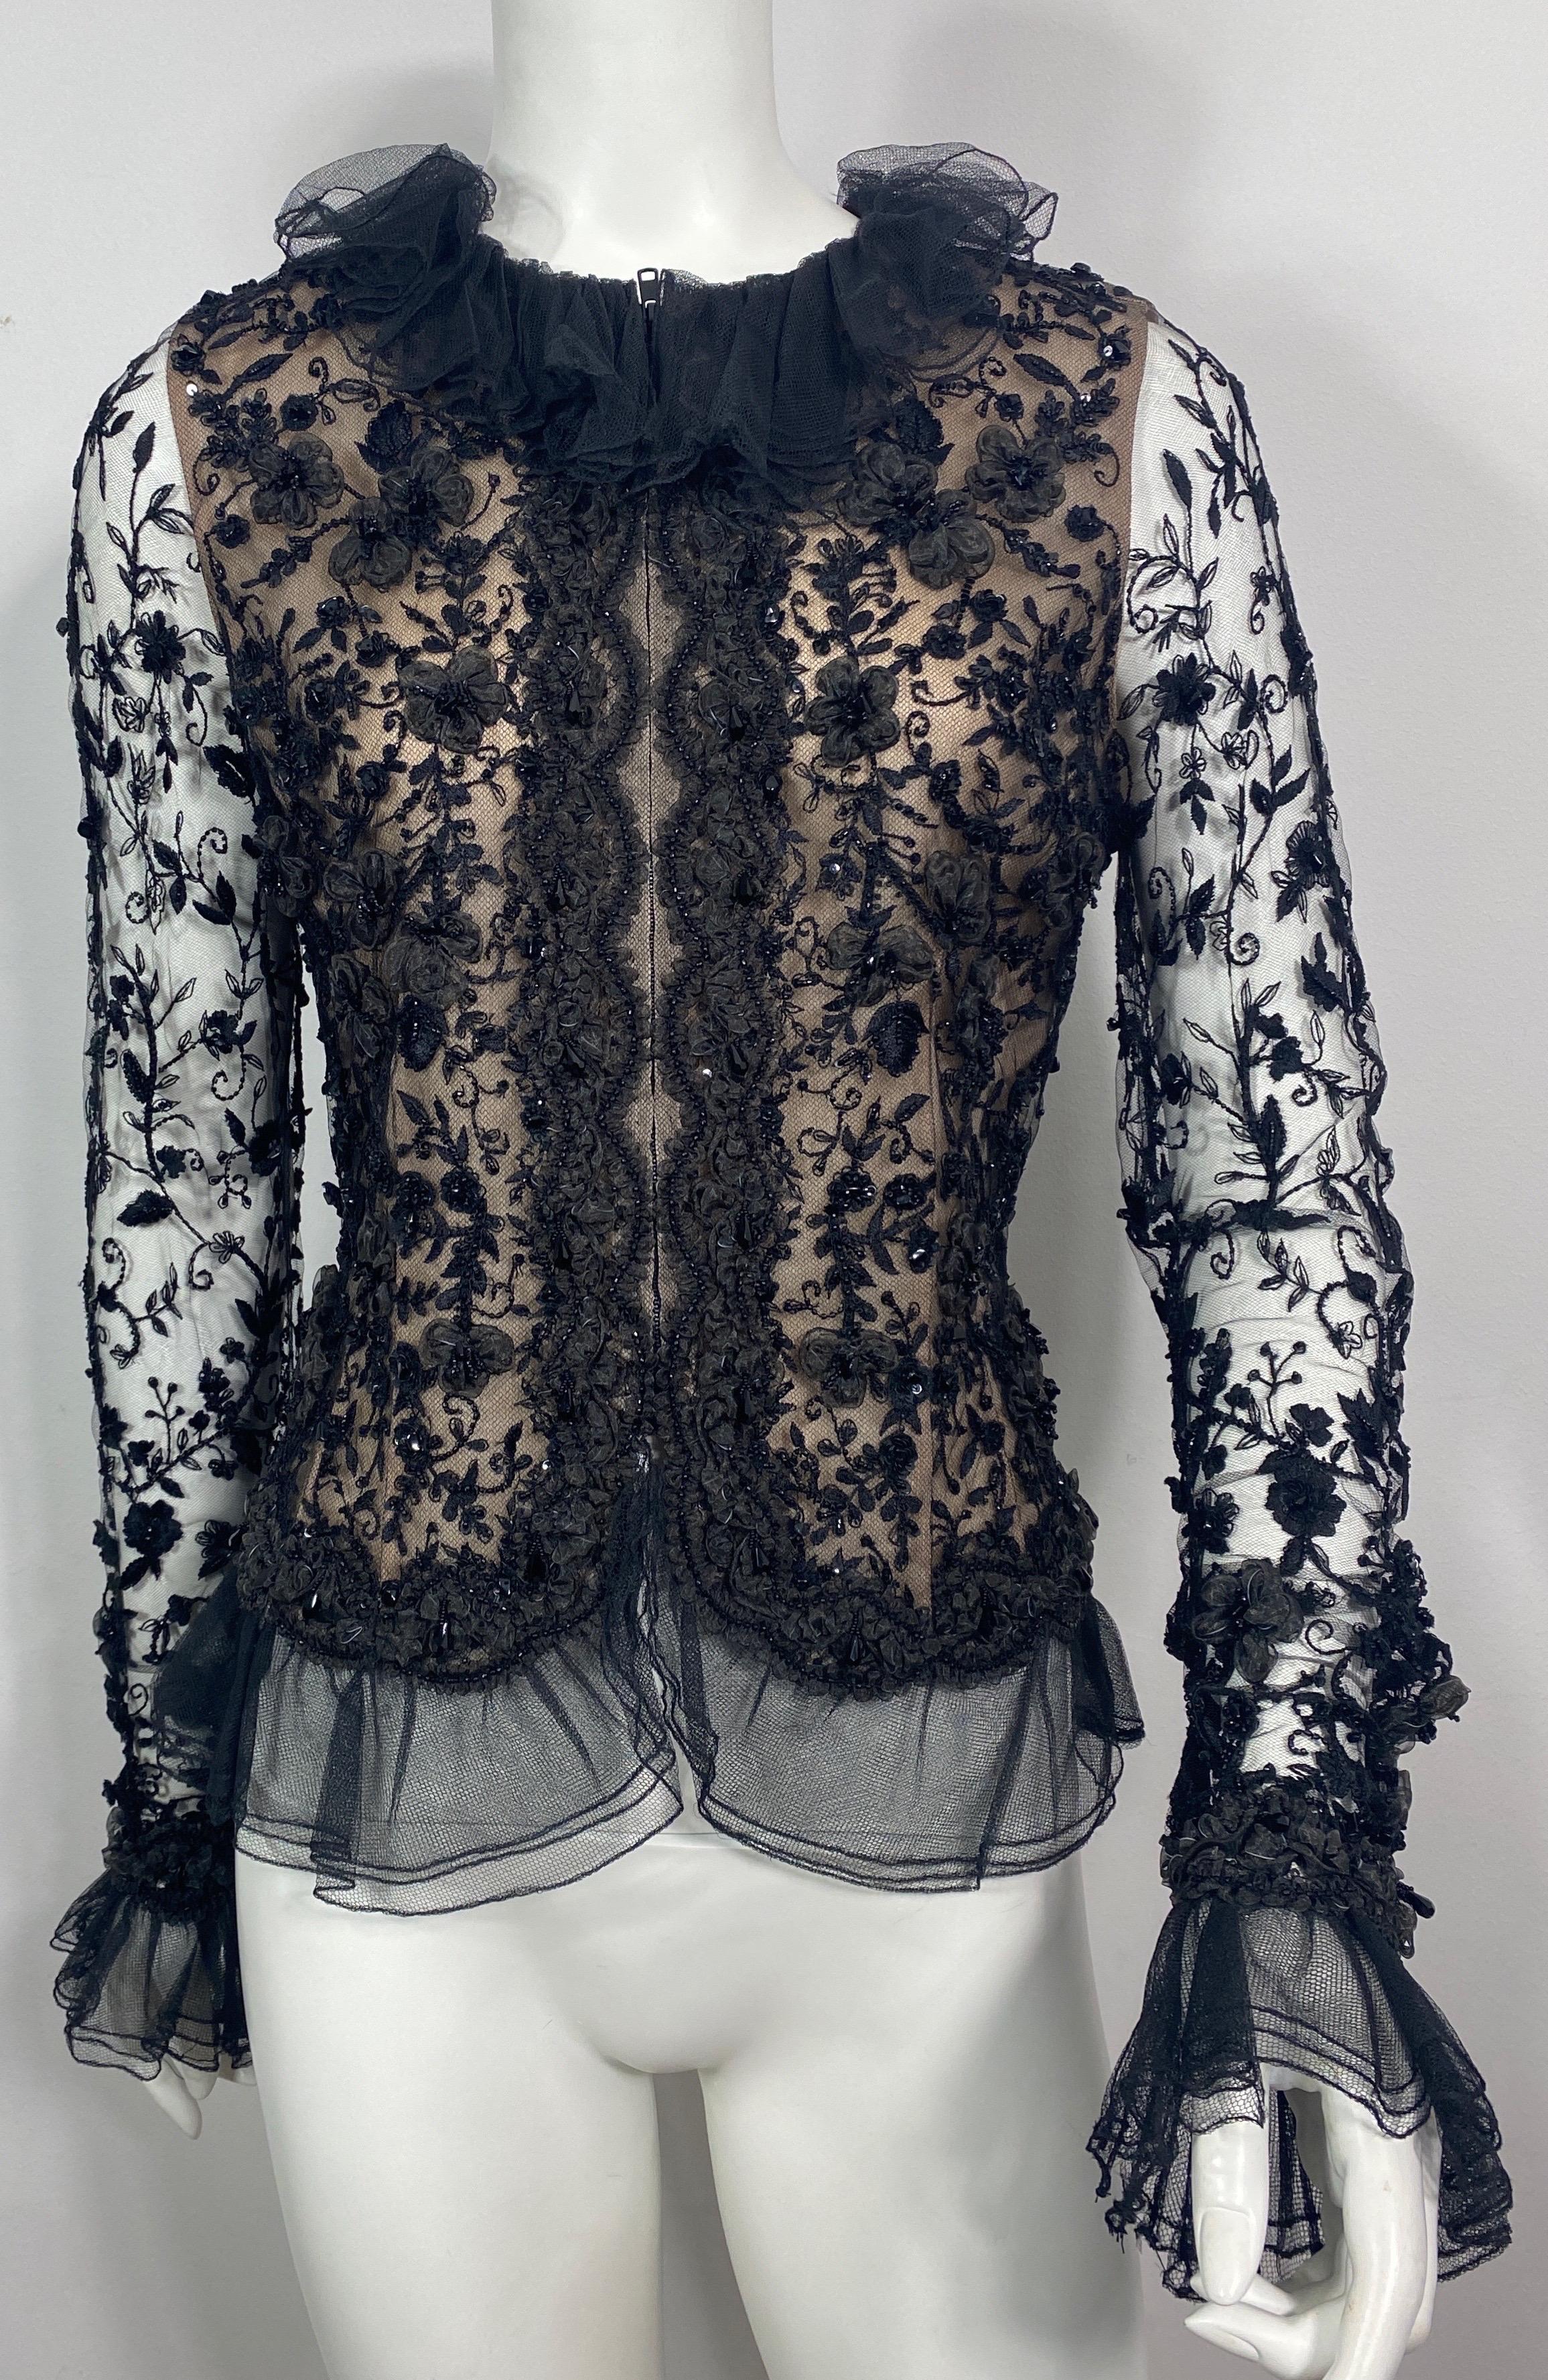 Oscar de La Renta 1980’s Black Lace Embellished Beaded Top Jacket-Size 10 This top can be worn as a jacket, is made of a black lace mesh that is heavily embellished in beads and silk like floral appliques, the bodice of the jacket is lined in a nude